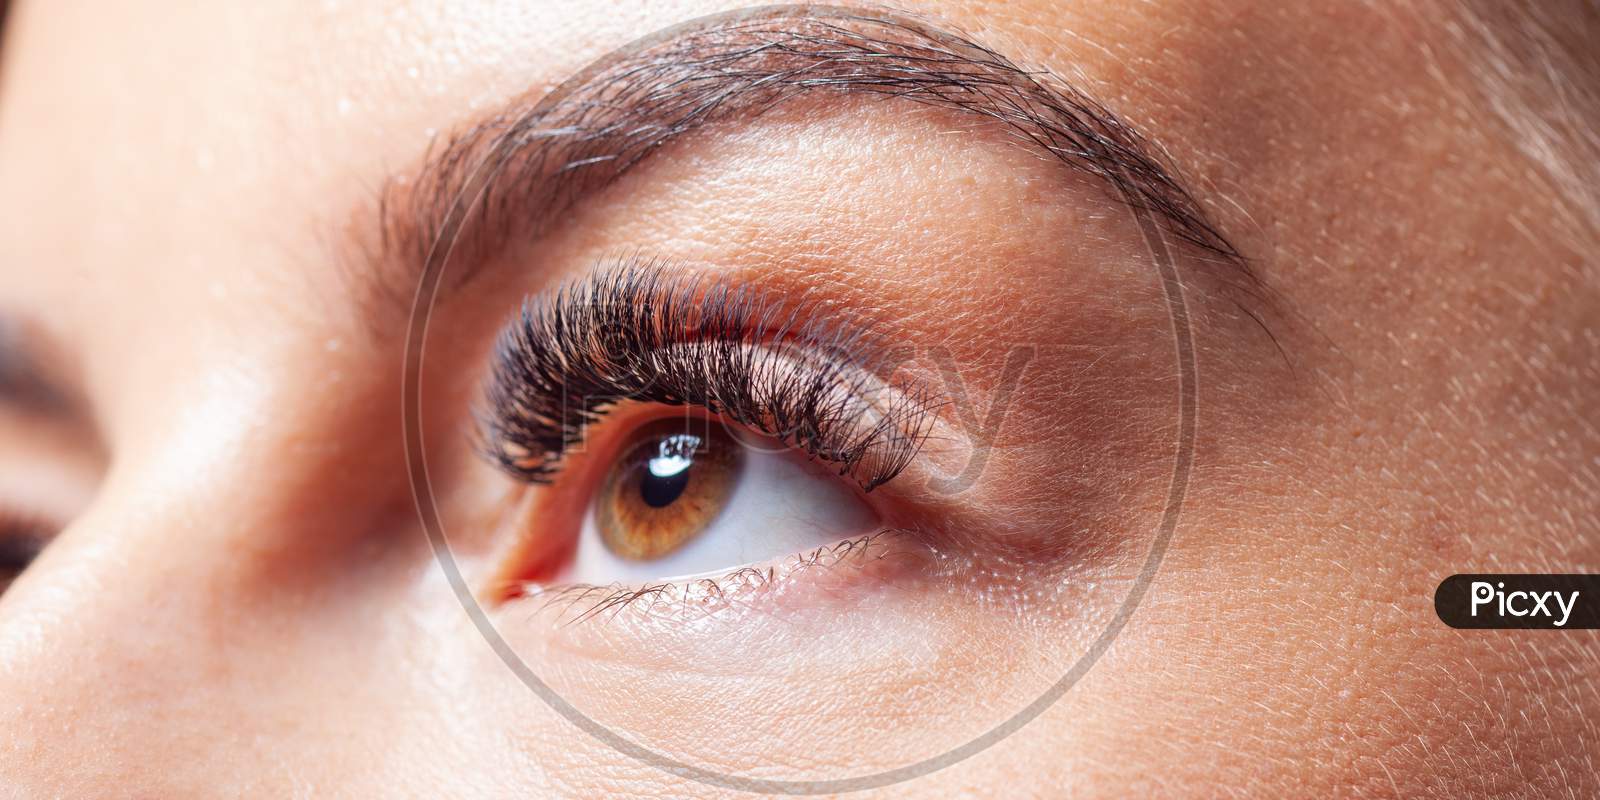 Woman Eyes With Eyelashes Extension. Lashes Extension.